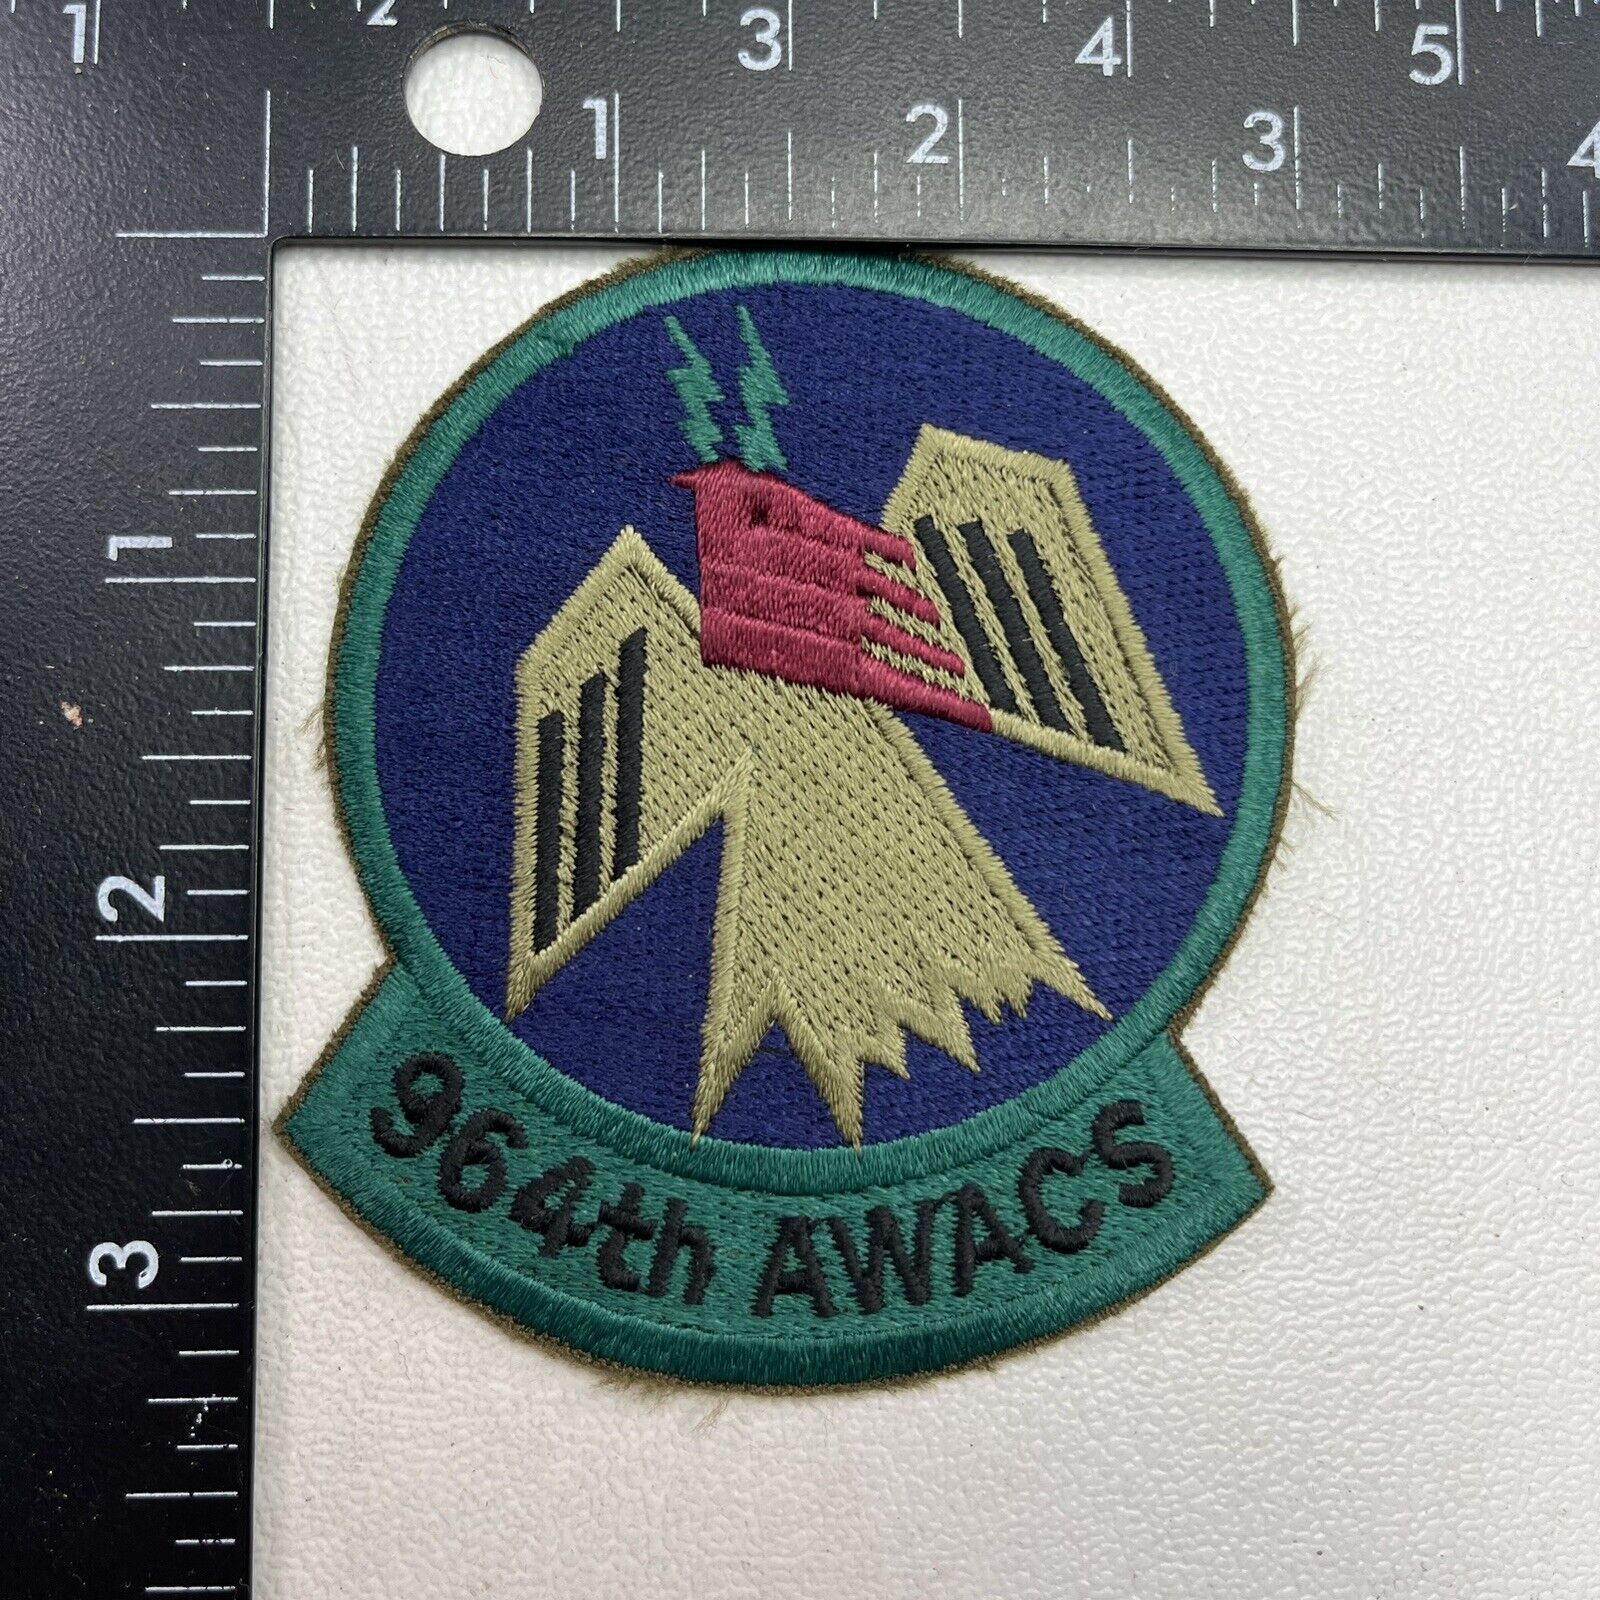 964TH AWACS United States Air Force Patch 44MX